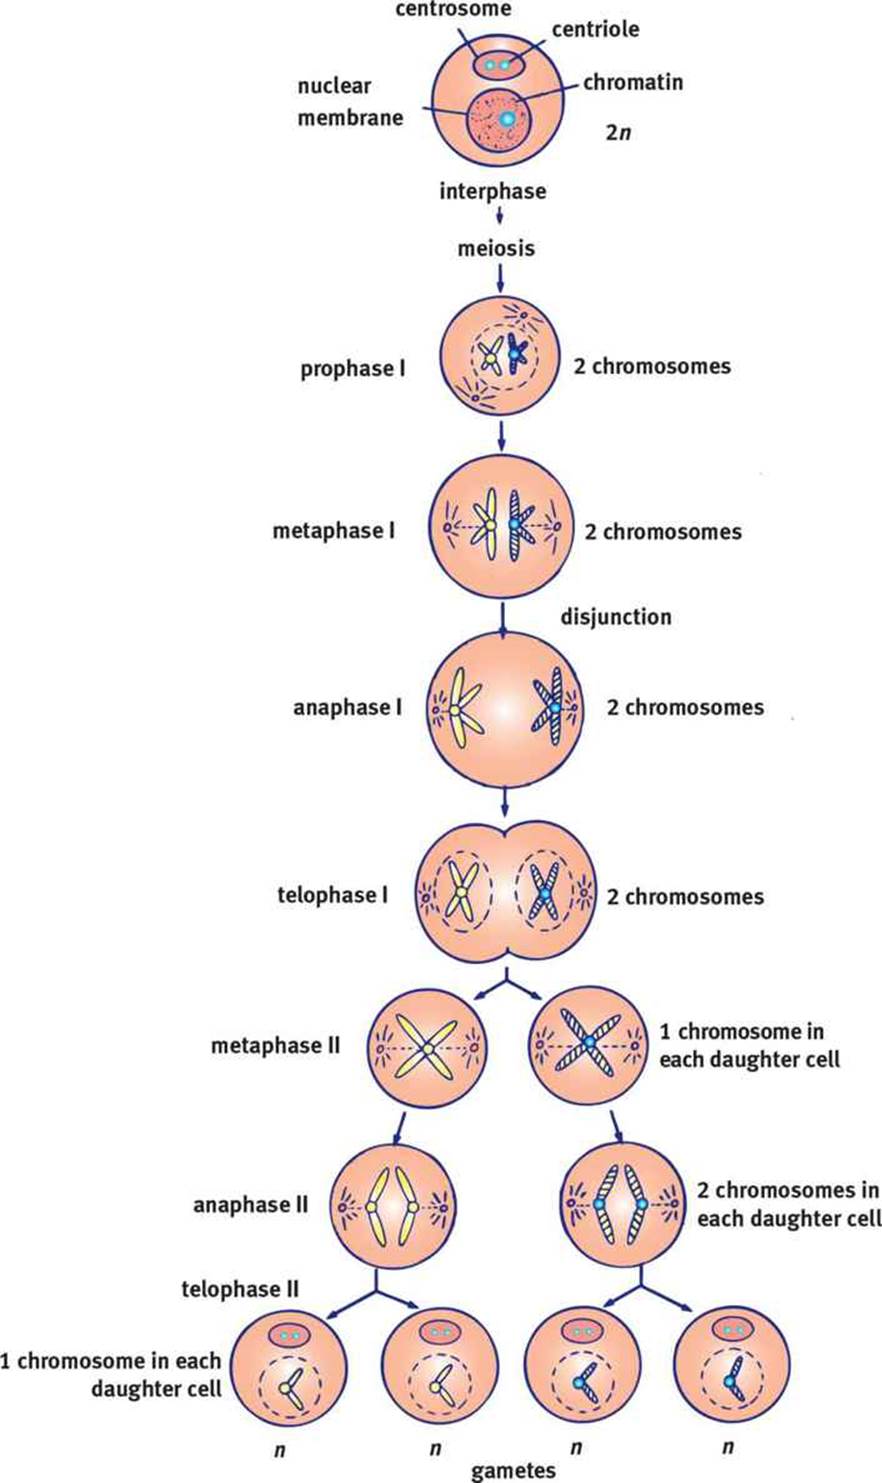 figure-2-5-meiosis-meiosis-results-in-up-to-four-nonidentical-daughter-cells